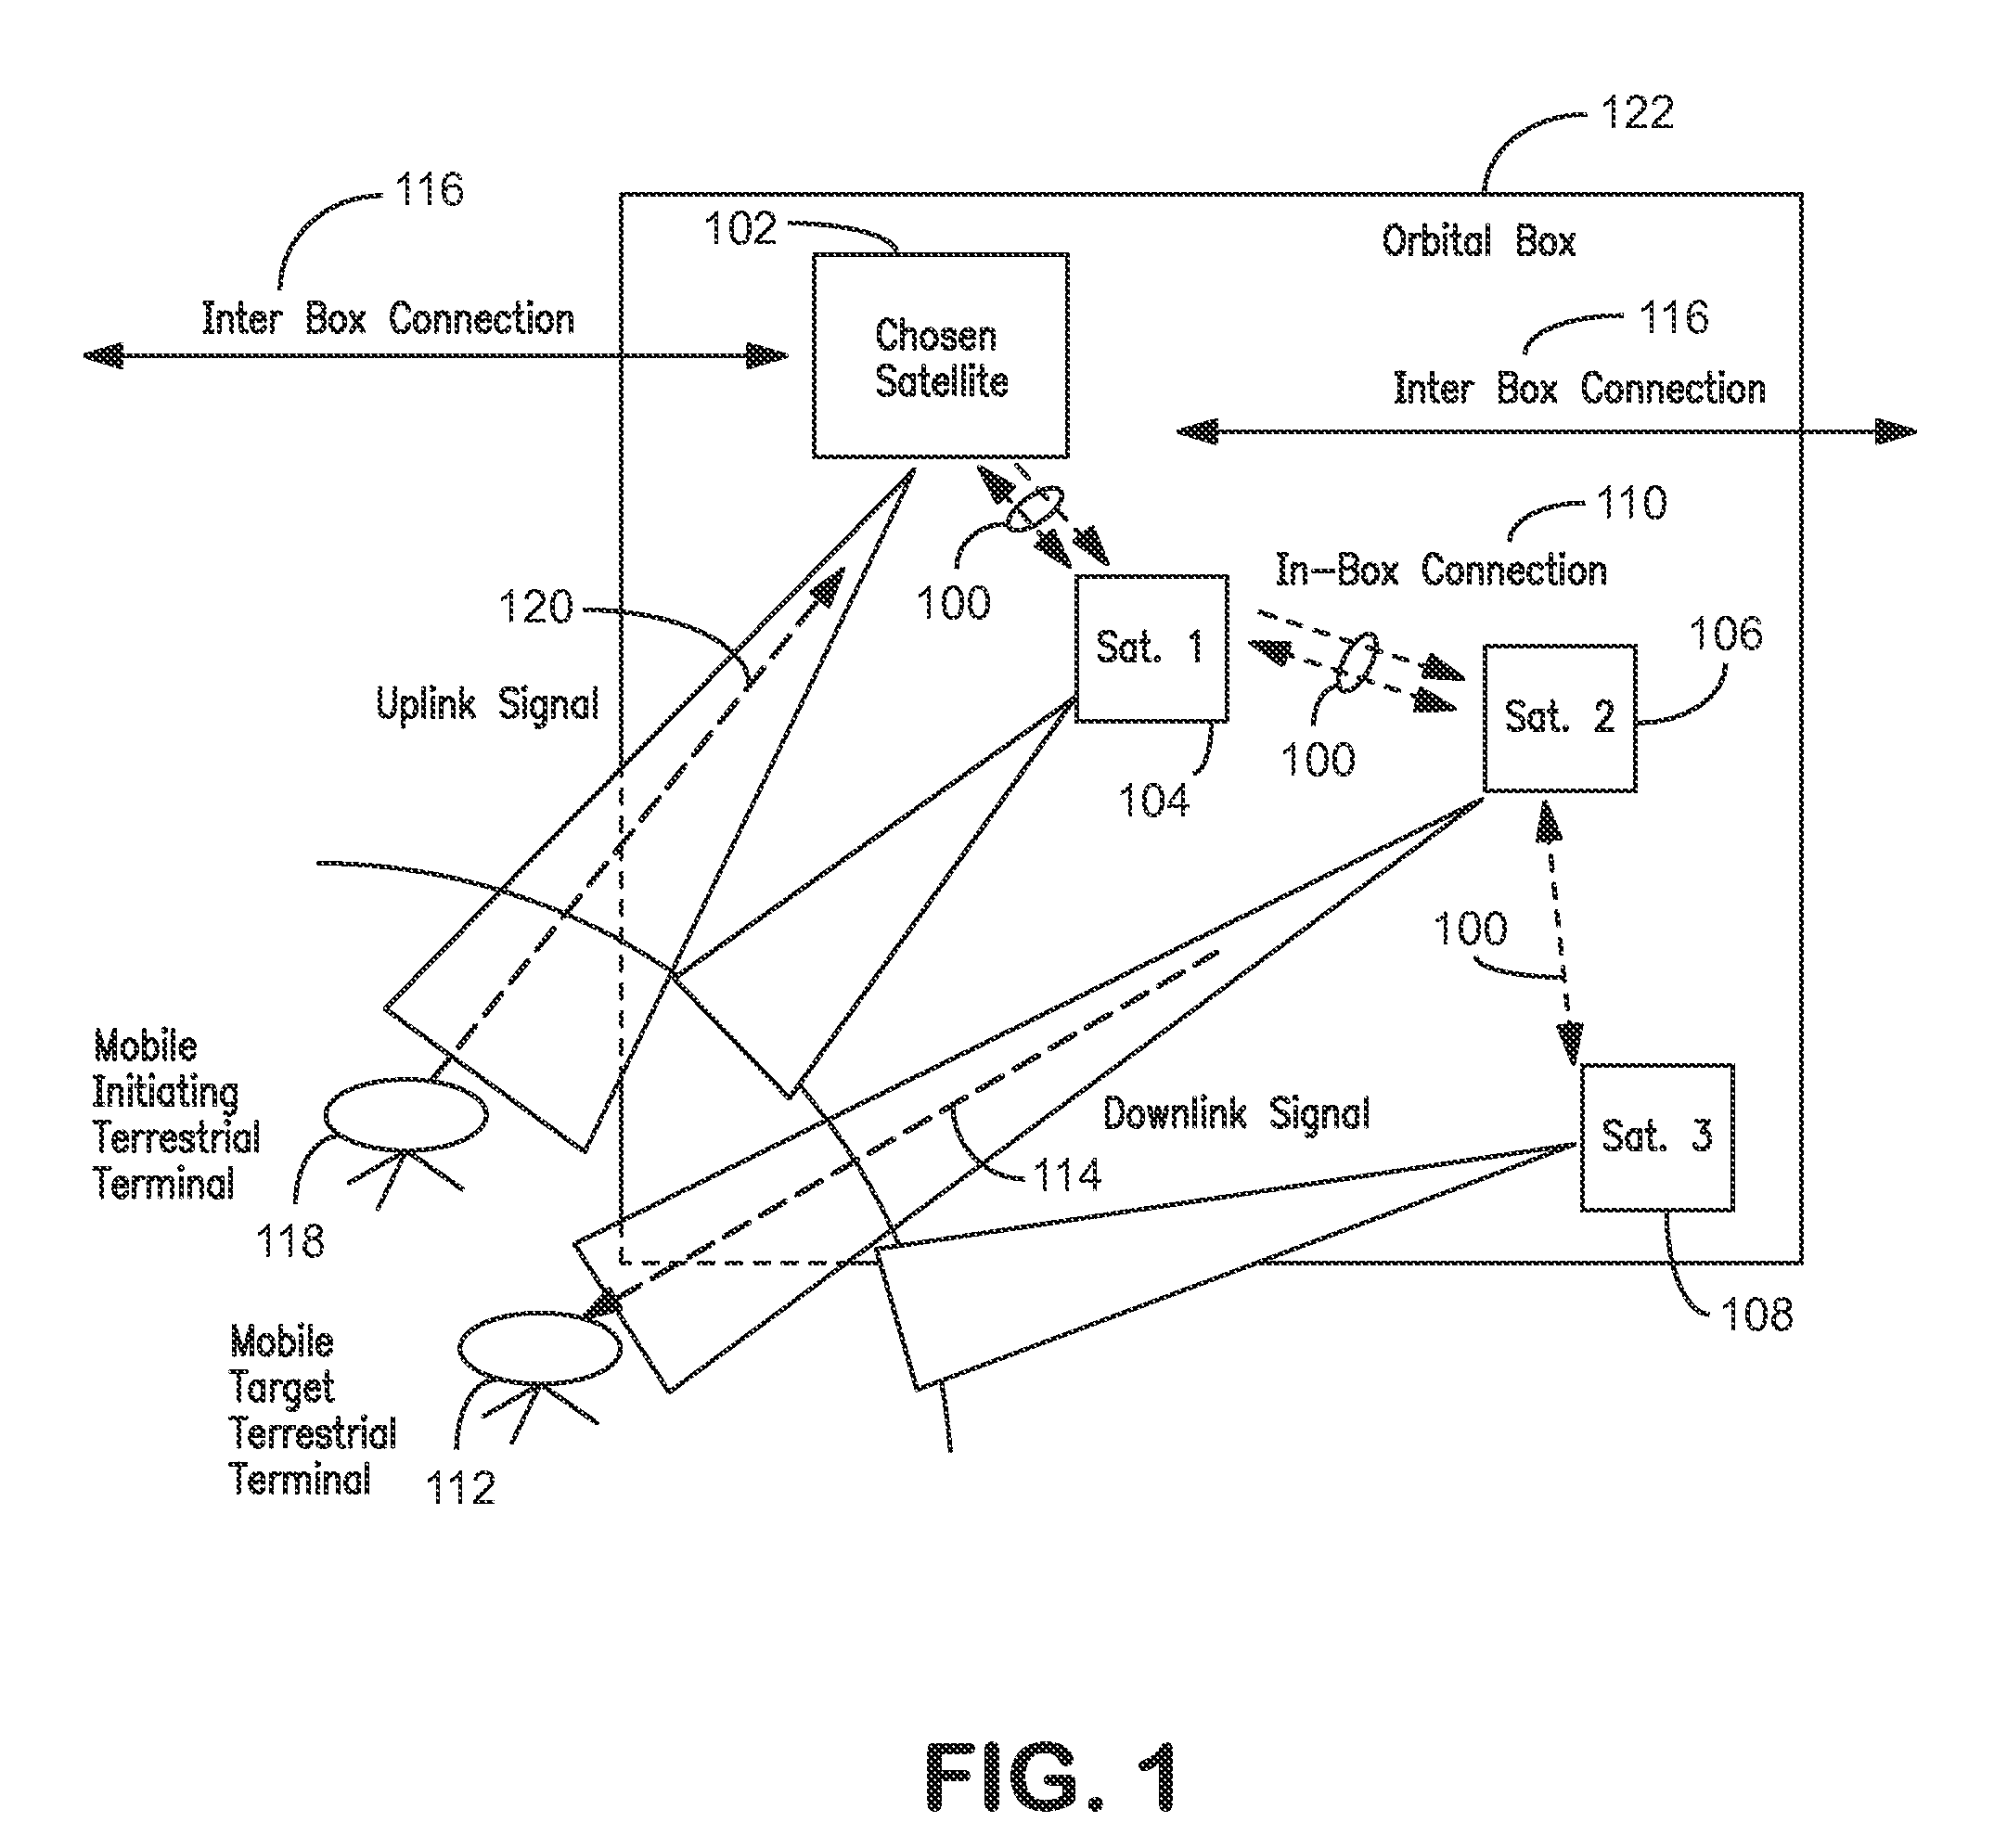 Systems and methods for satellite communications with mobile terrestrial terminals